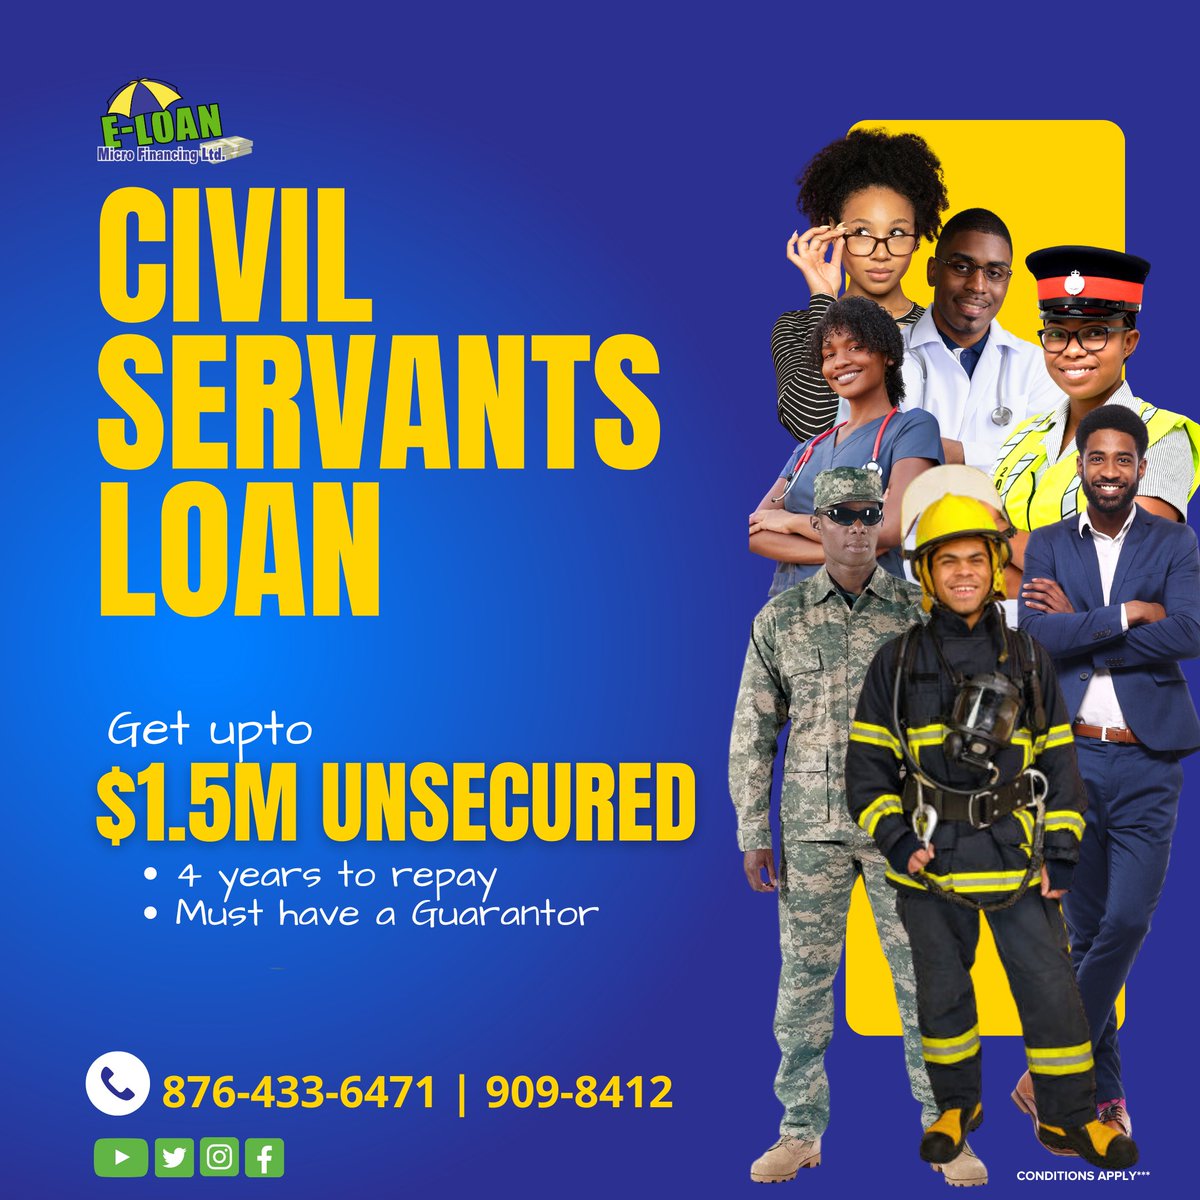 Get up to $1.5 Million with the ease of repayment over four years.

Don't miss out! Apply Today.

#ELoanMFLimited #JamaicaPublicSector #PublicSectorsLoan #eloan876 #businessloans #Montegobayloancompany